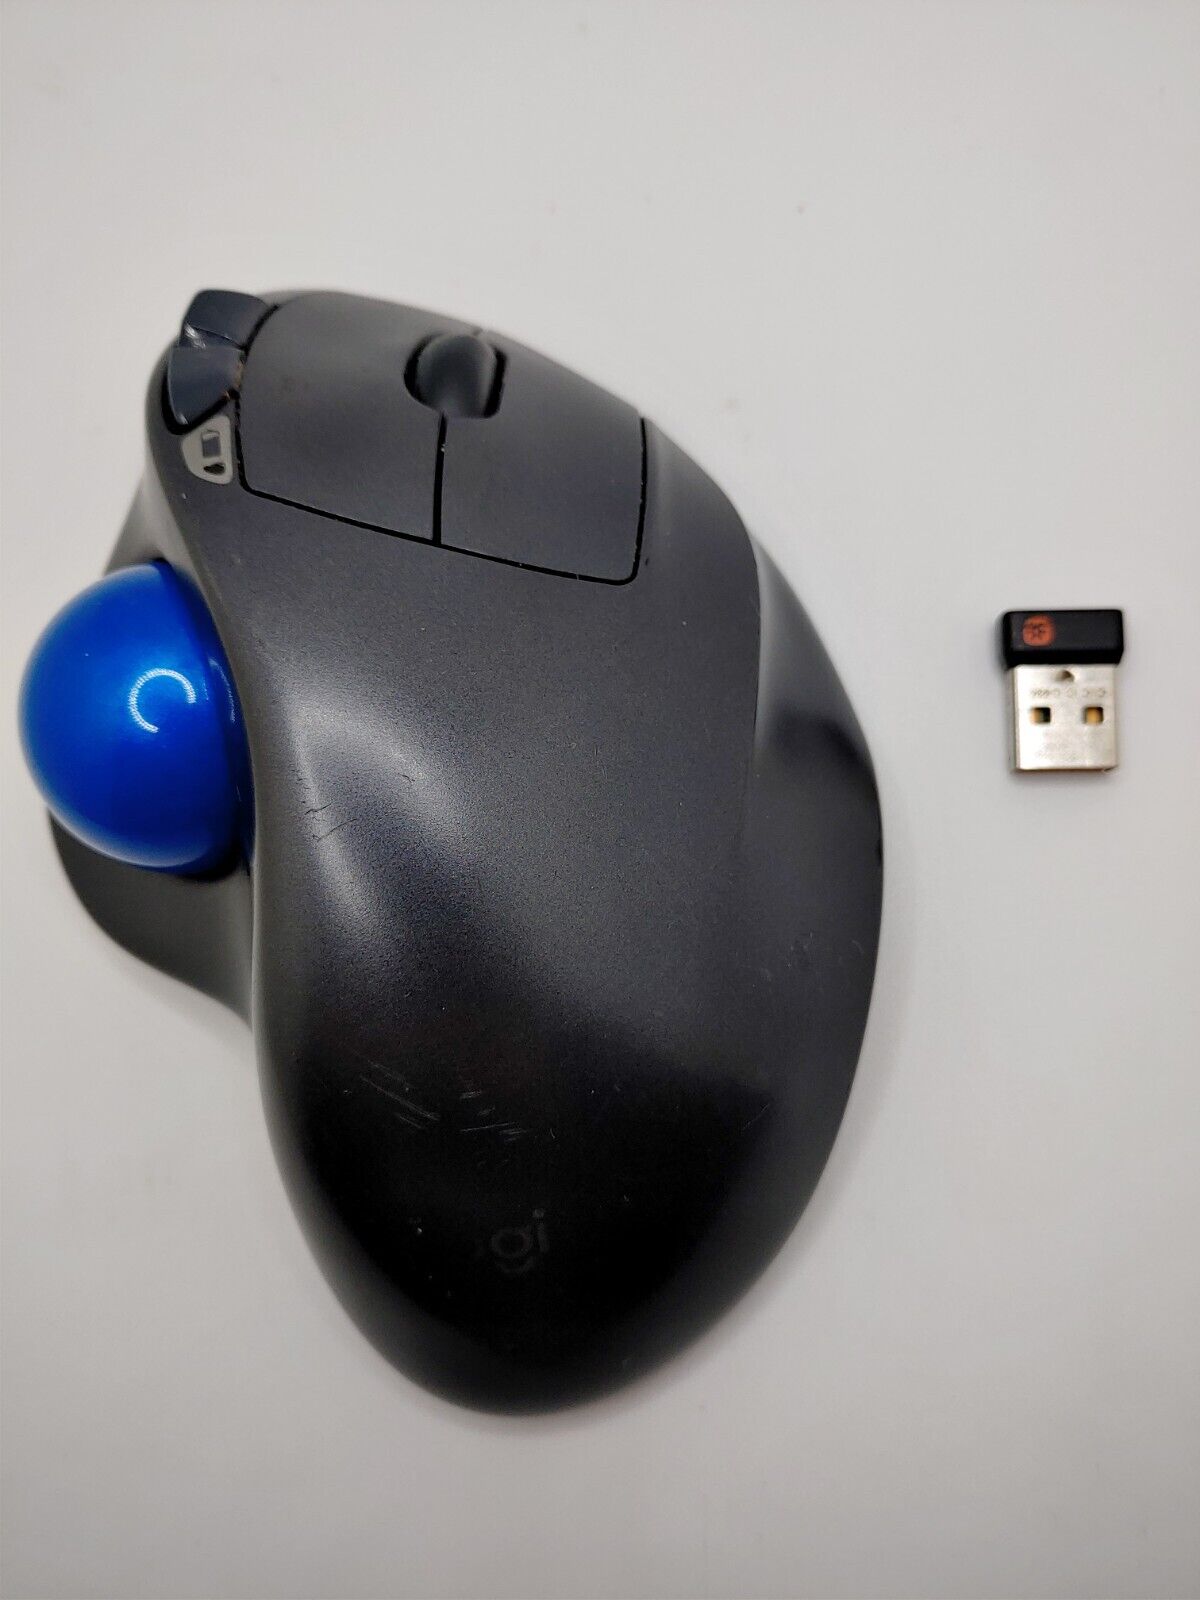 Logitech M570 Wireless Trackball Mouse With Dongle Missing back Cover Tested